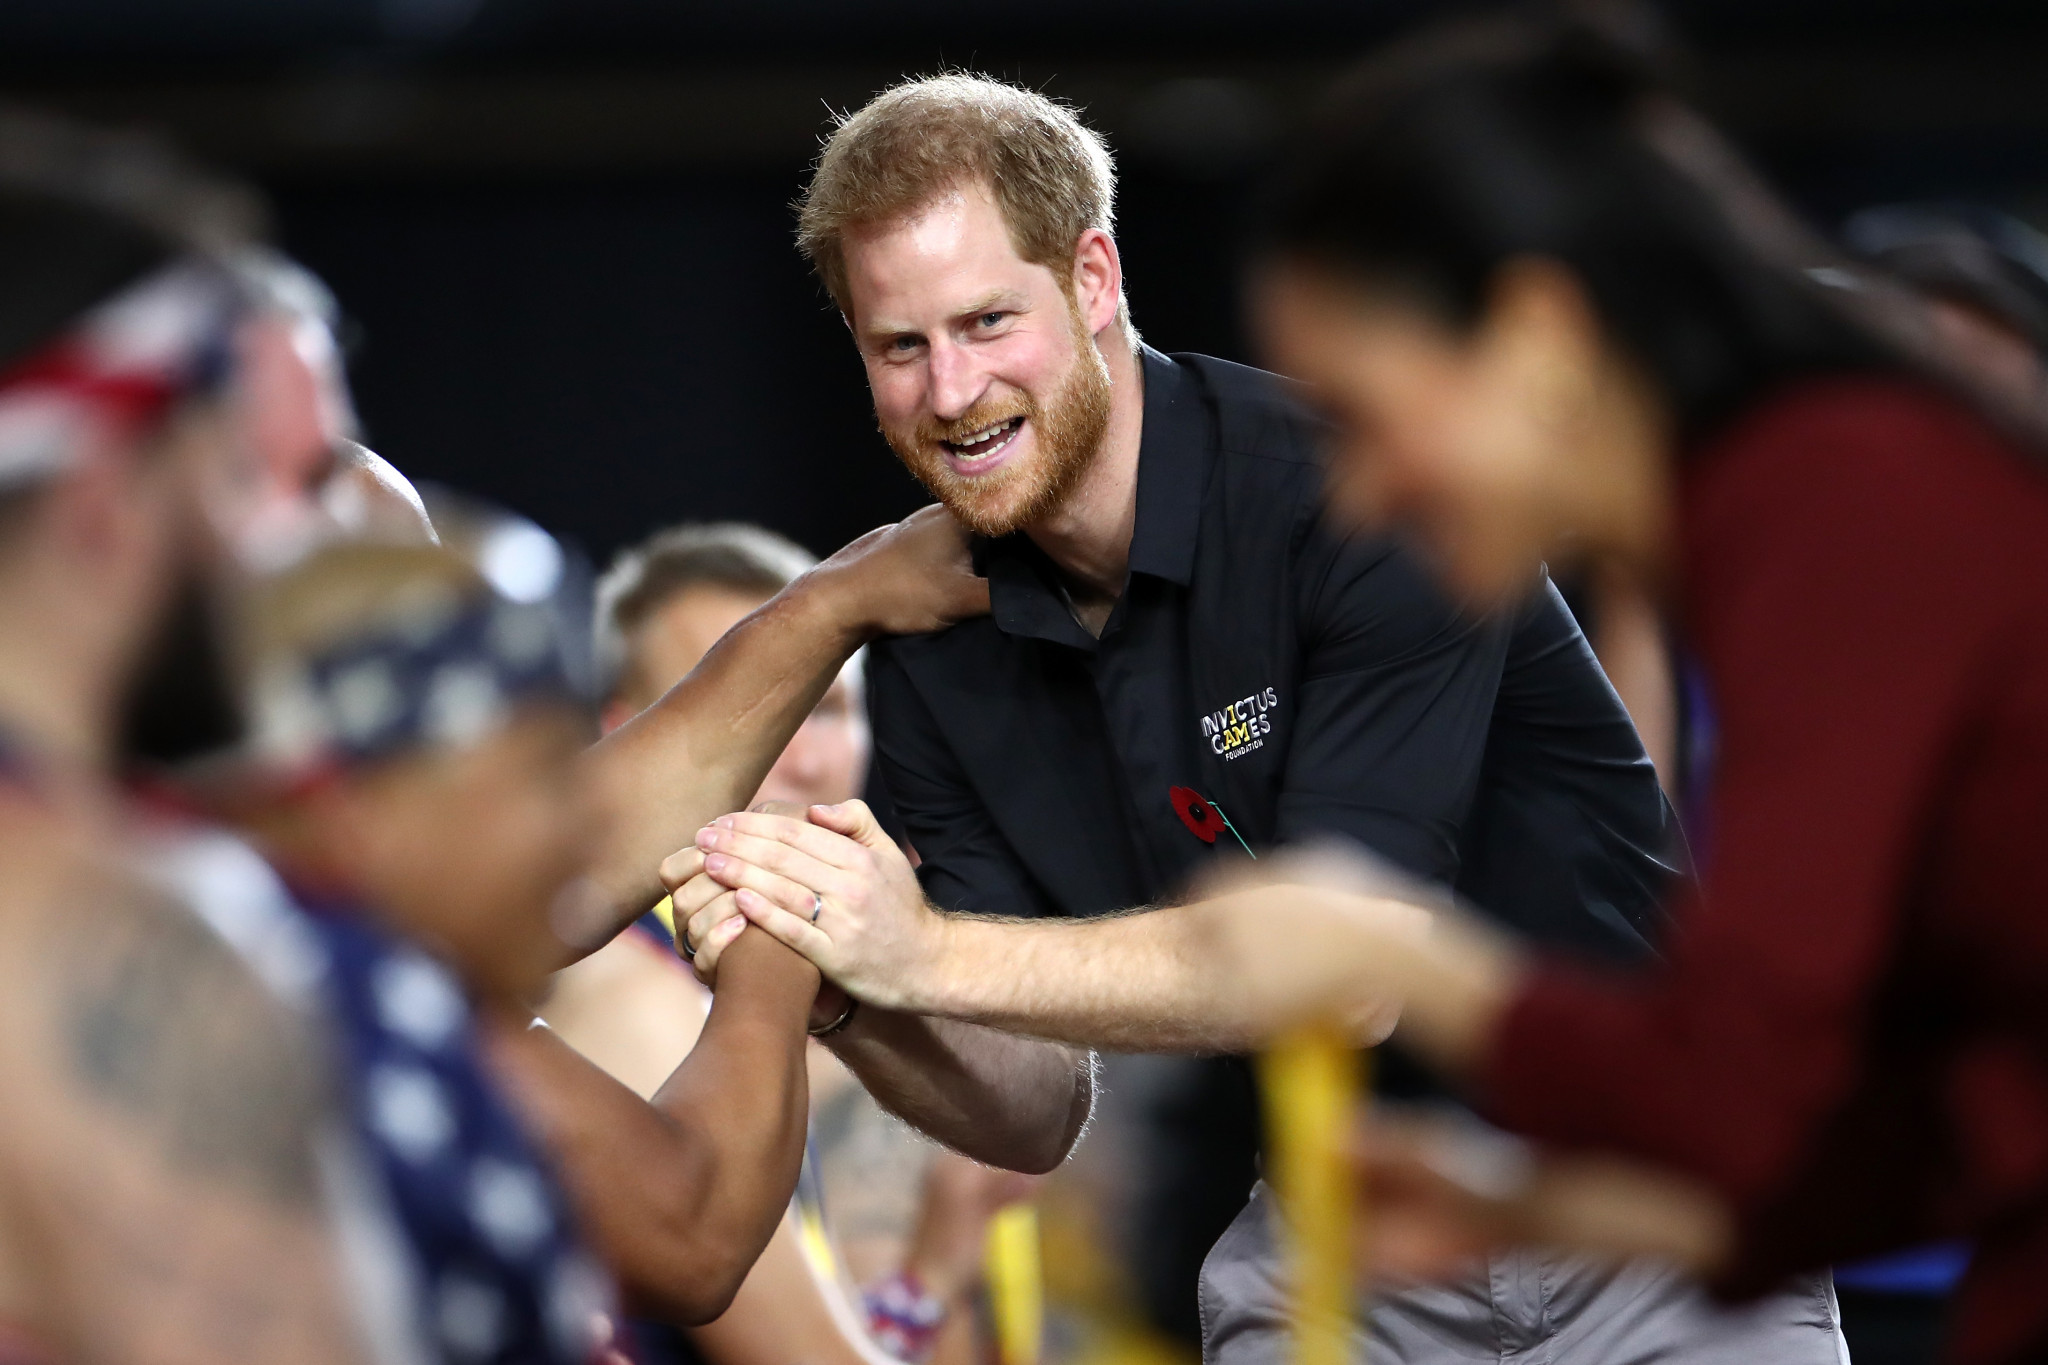 Prince Harry has donated the damages won from a court case to the Invictus Games Foundation ©Getty Images